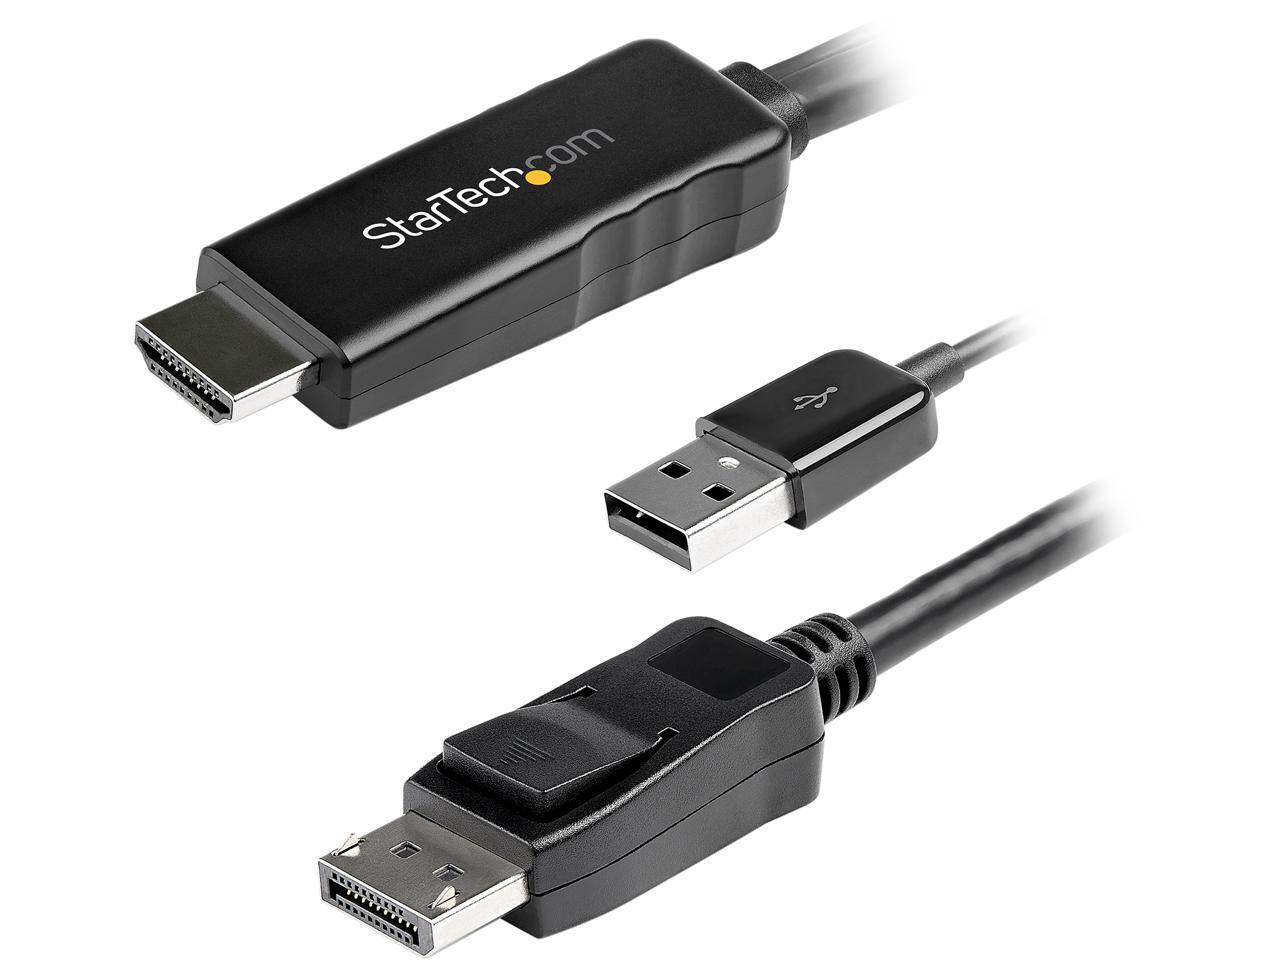 StarTech.com HD2DPMM2M 2m (6.6 ft.) HDMI to DisplayPort Adapter Cable with USB